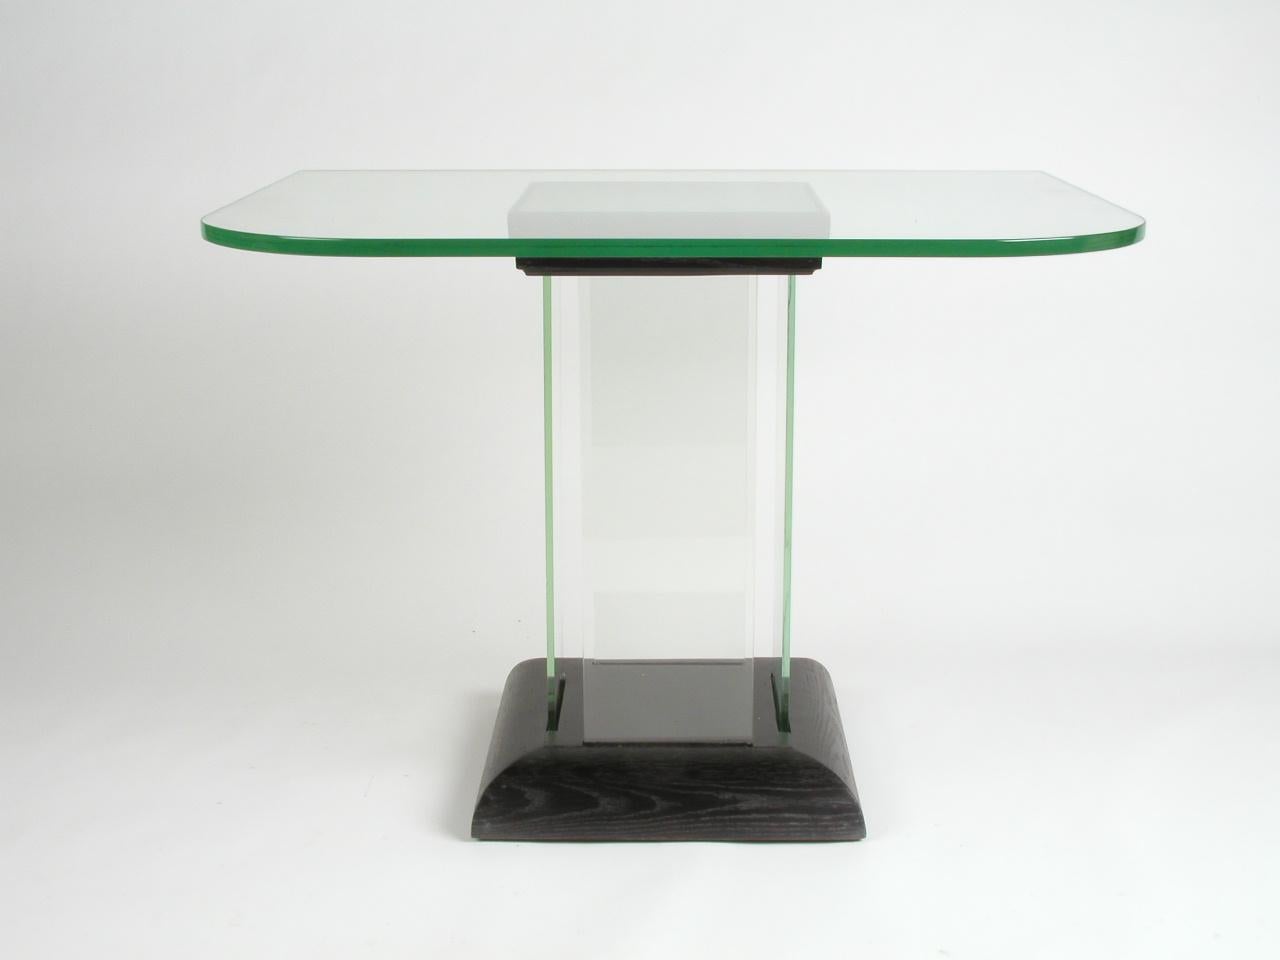 1940s New Era Modernage Glass Console or Dinette Table Black Ebonized Oak Base In Good Condition For Sale In St. Louis, MO